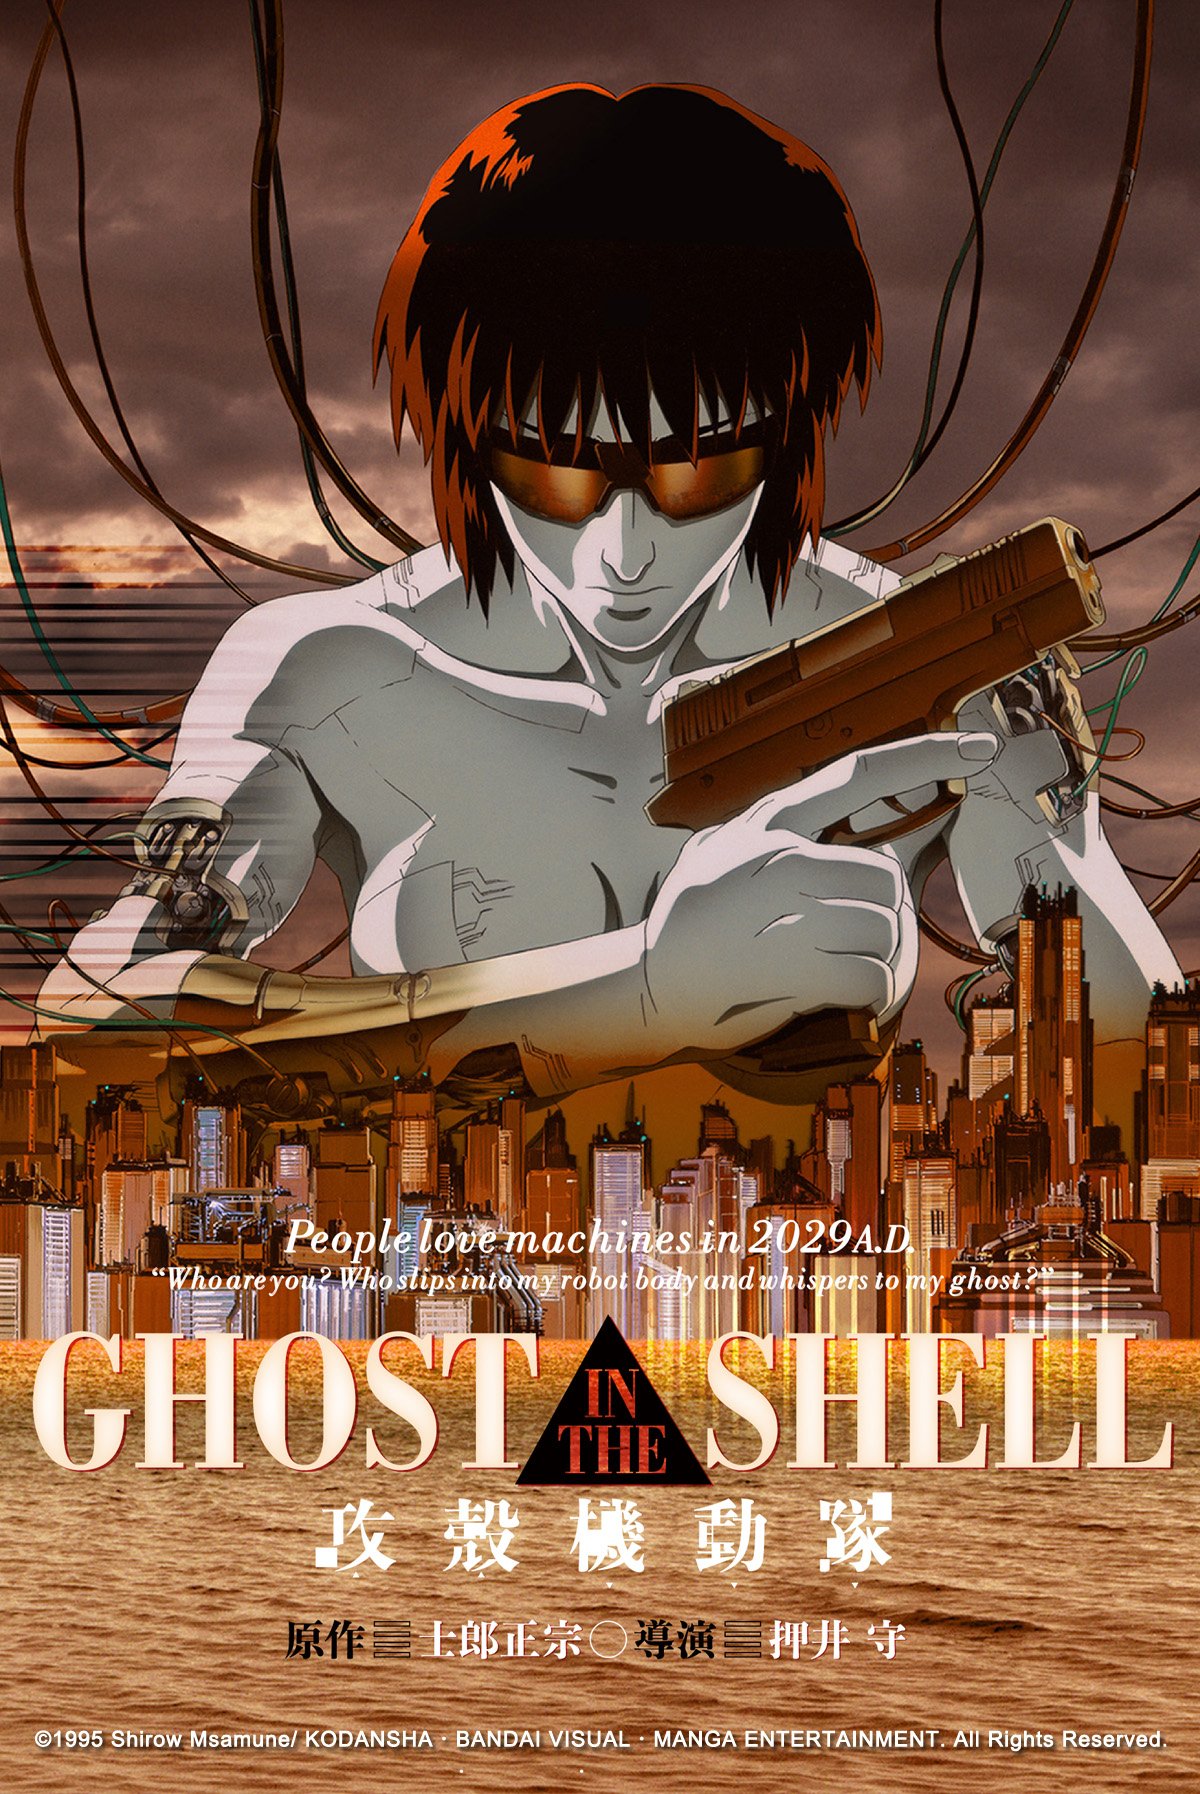 Now Player - Ghost in the Shell (Digital Restored Version)